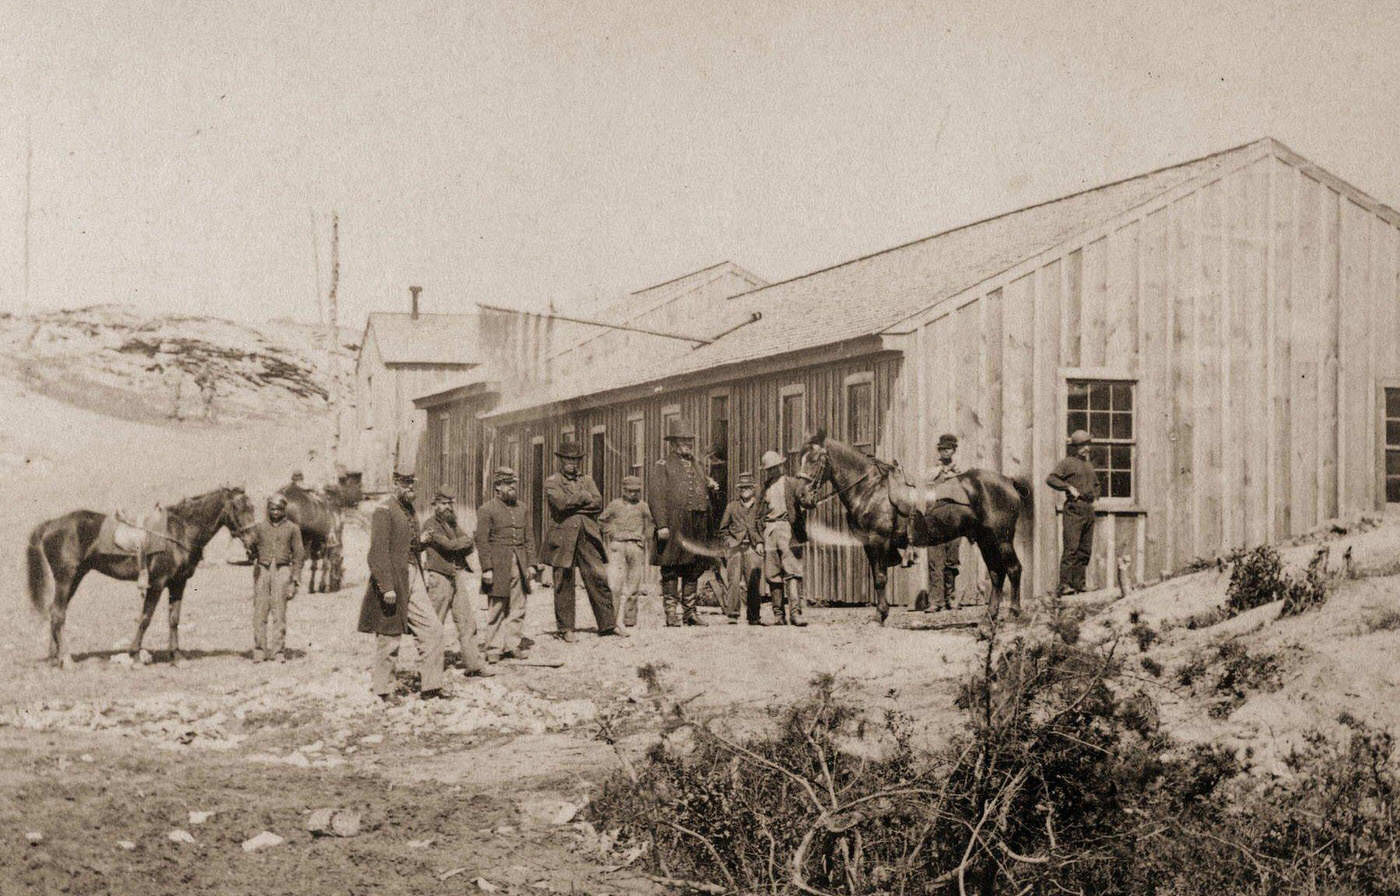 A Civil War scene featuring a view of a Confederate Quartermasters House with a group of officers meeting outside, Washington DC, 1863.